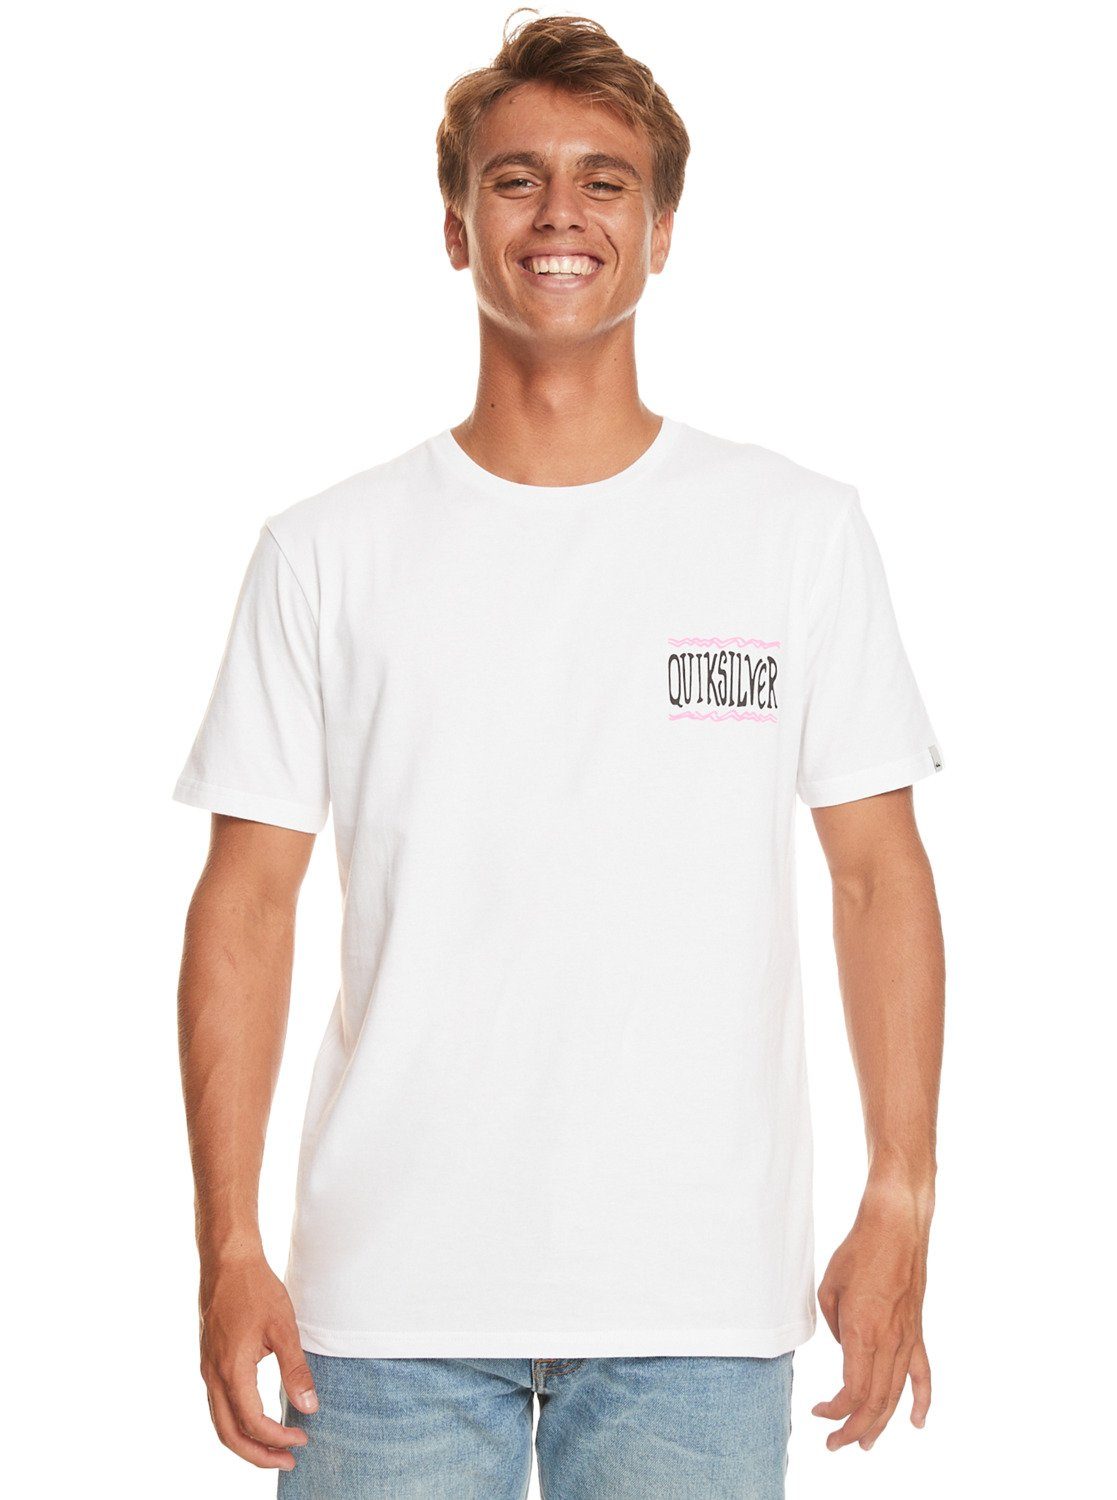 Quiksilver T-Shirt Taking Roots White